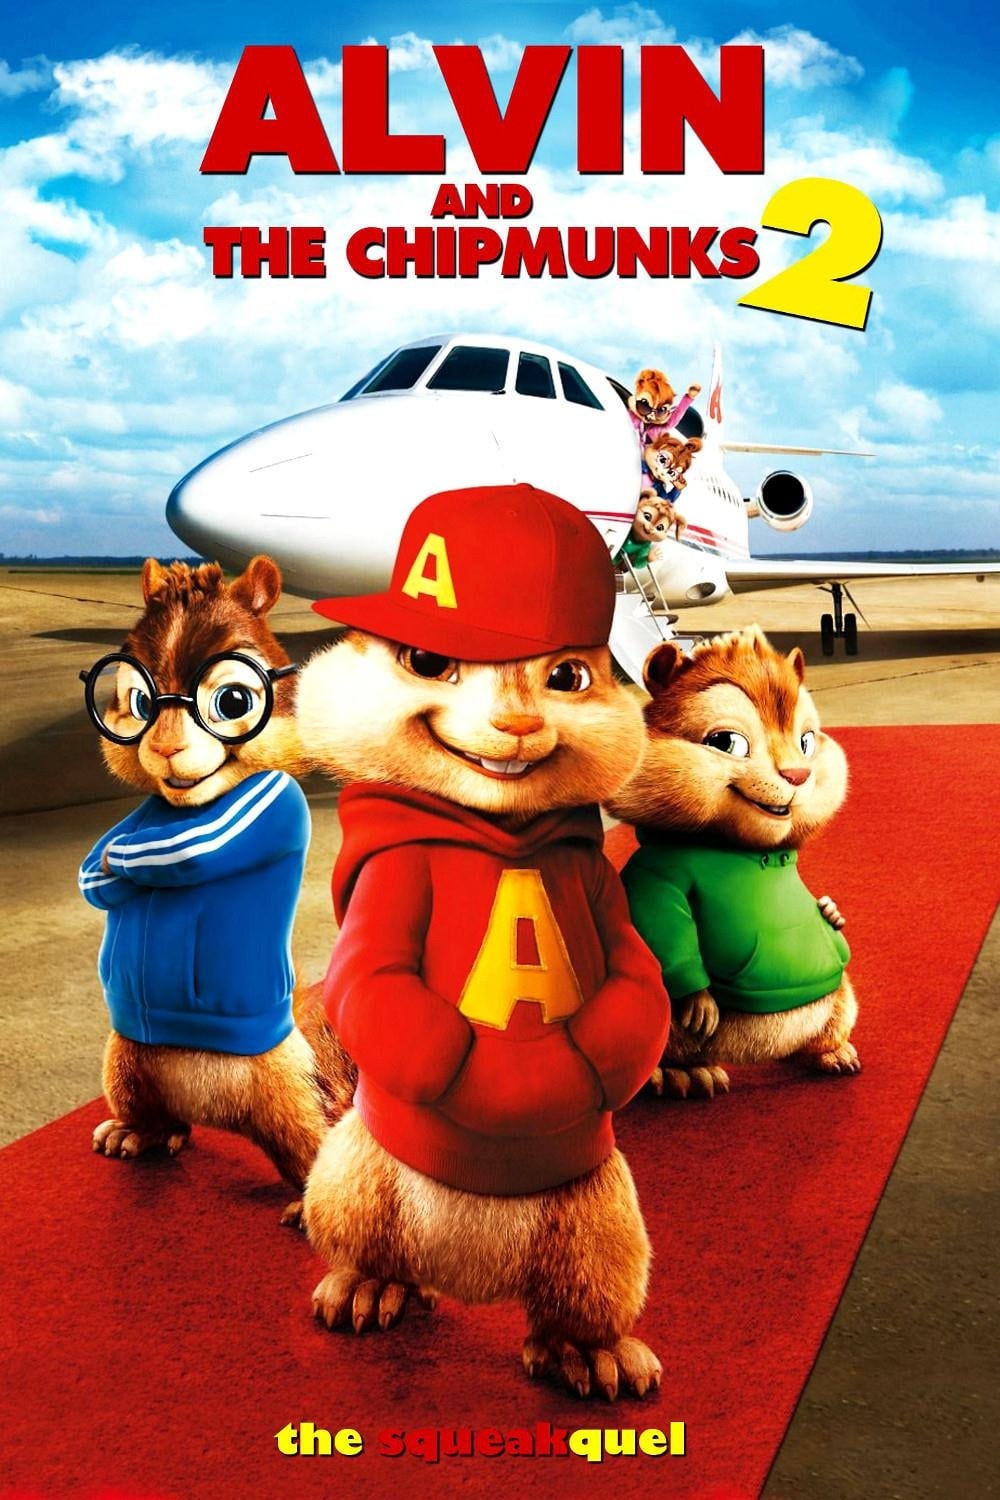 Image Alvin and the Chipmunks: The Squeakquel